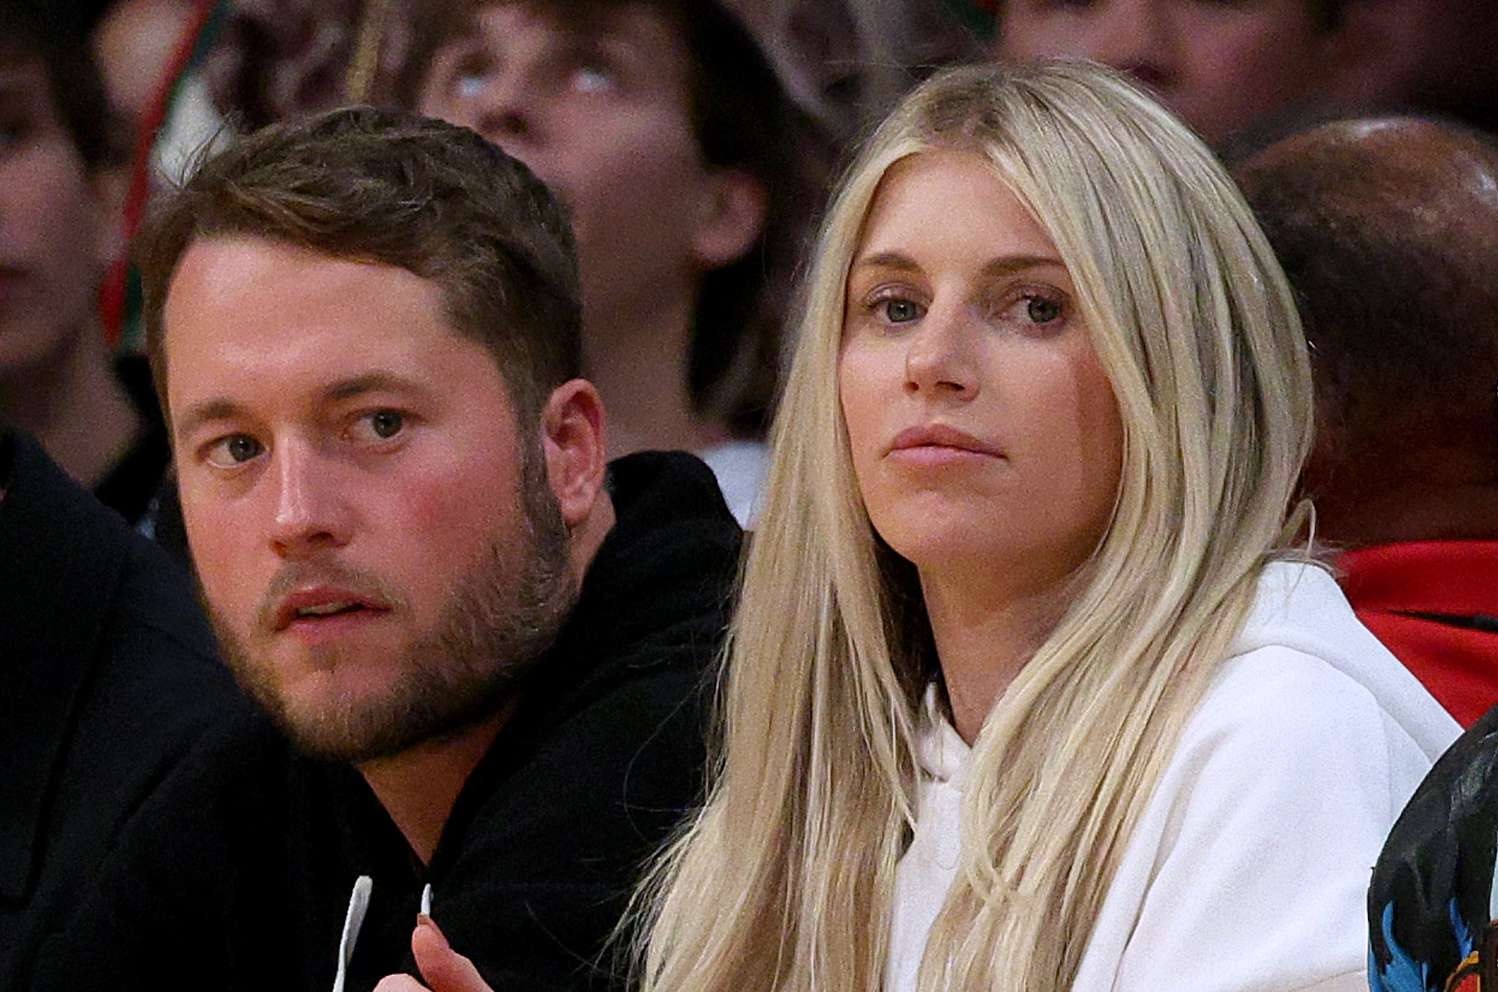 Matthew Stafford's Wife Complains About Crowd At Rams Games TMSPN